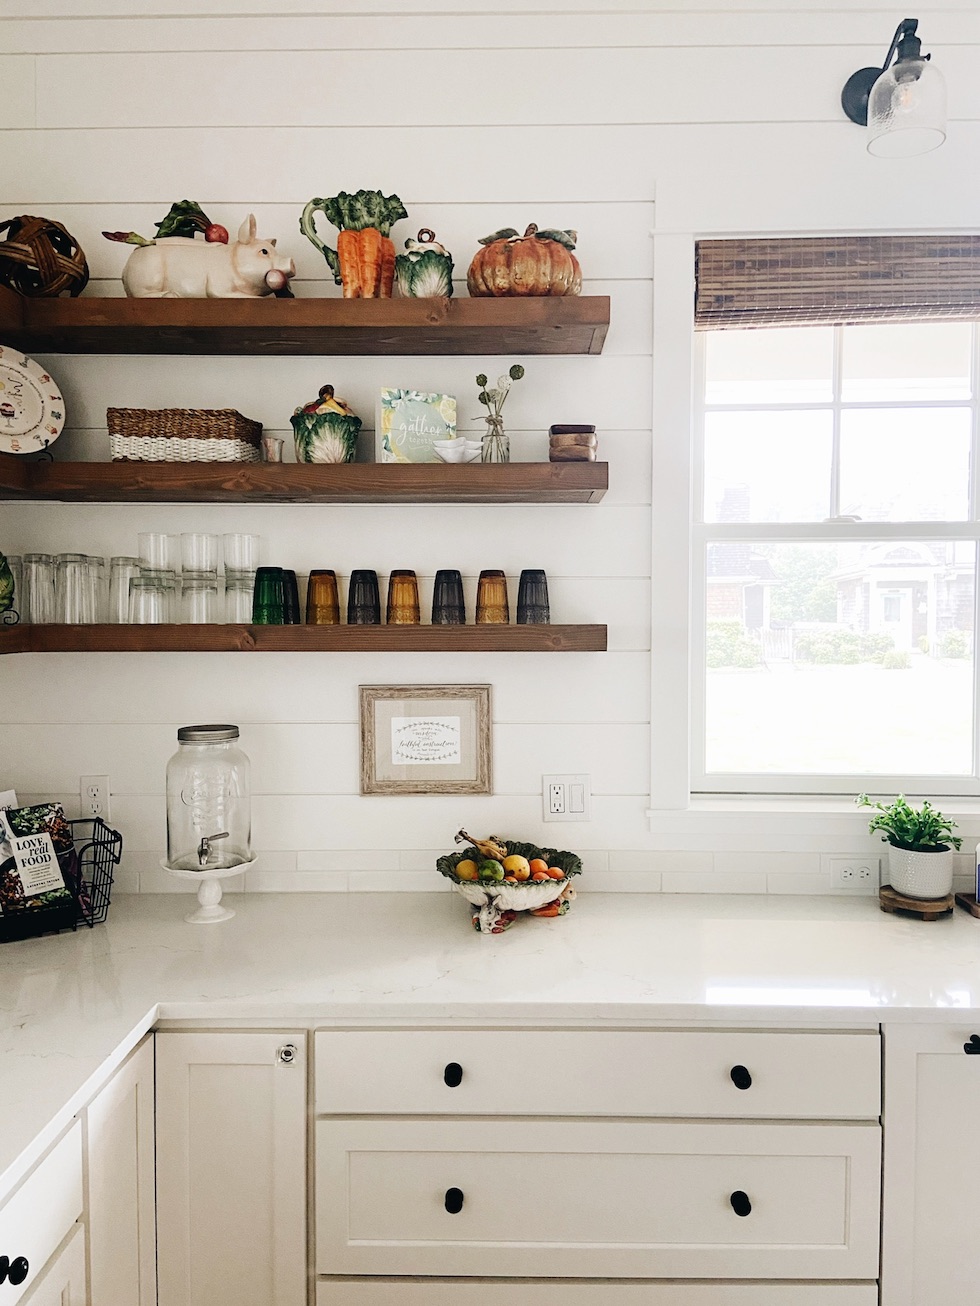 14 Ideas for a Cozy Fall Kitchen